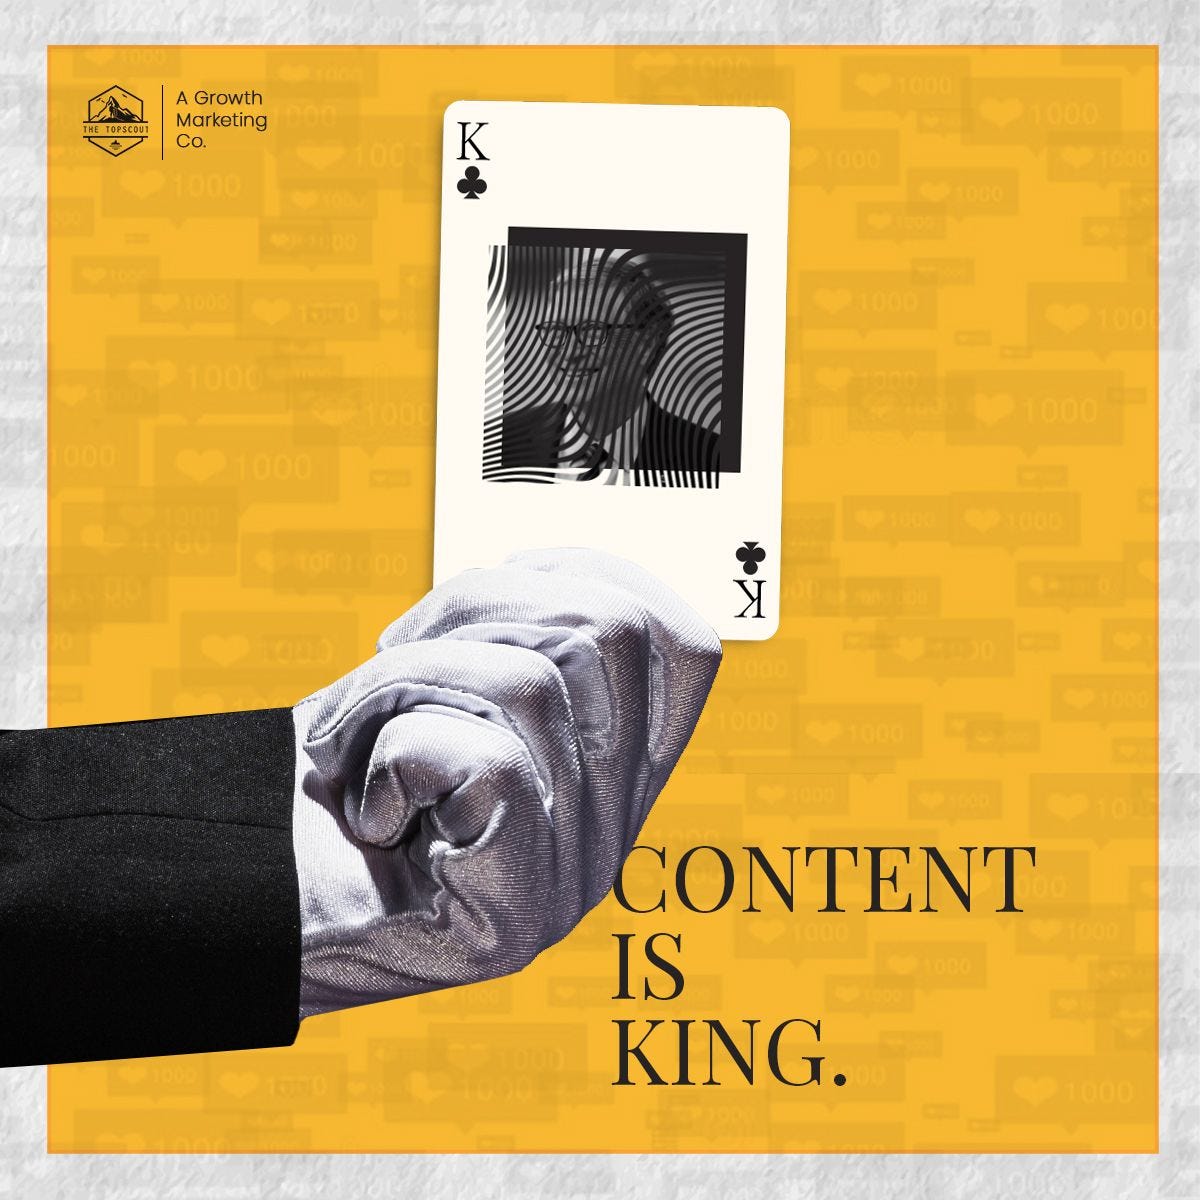 Content is the constant king!